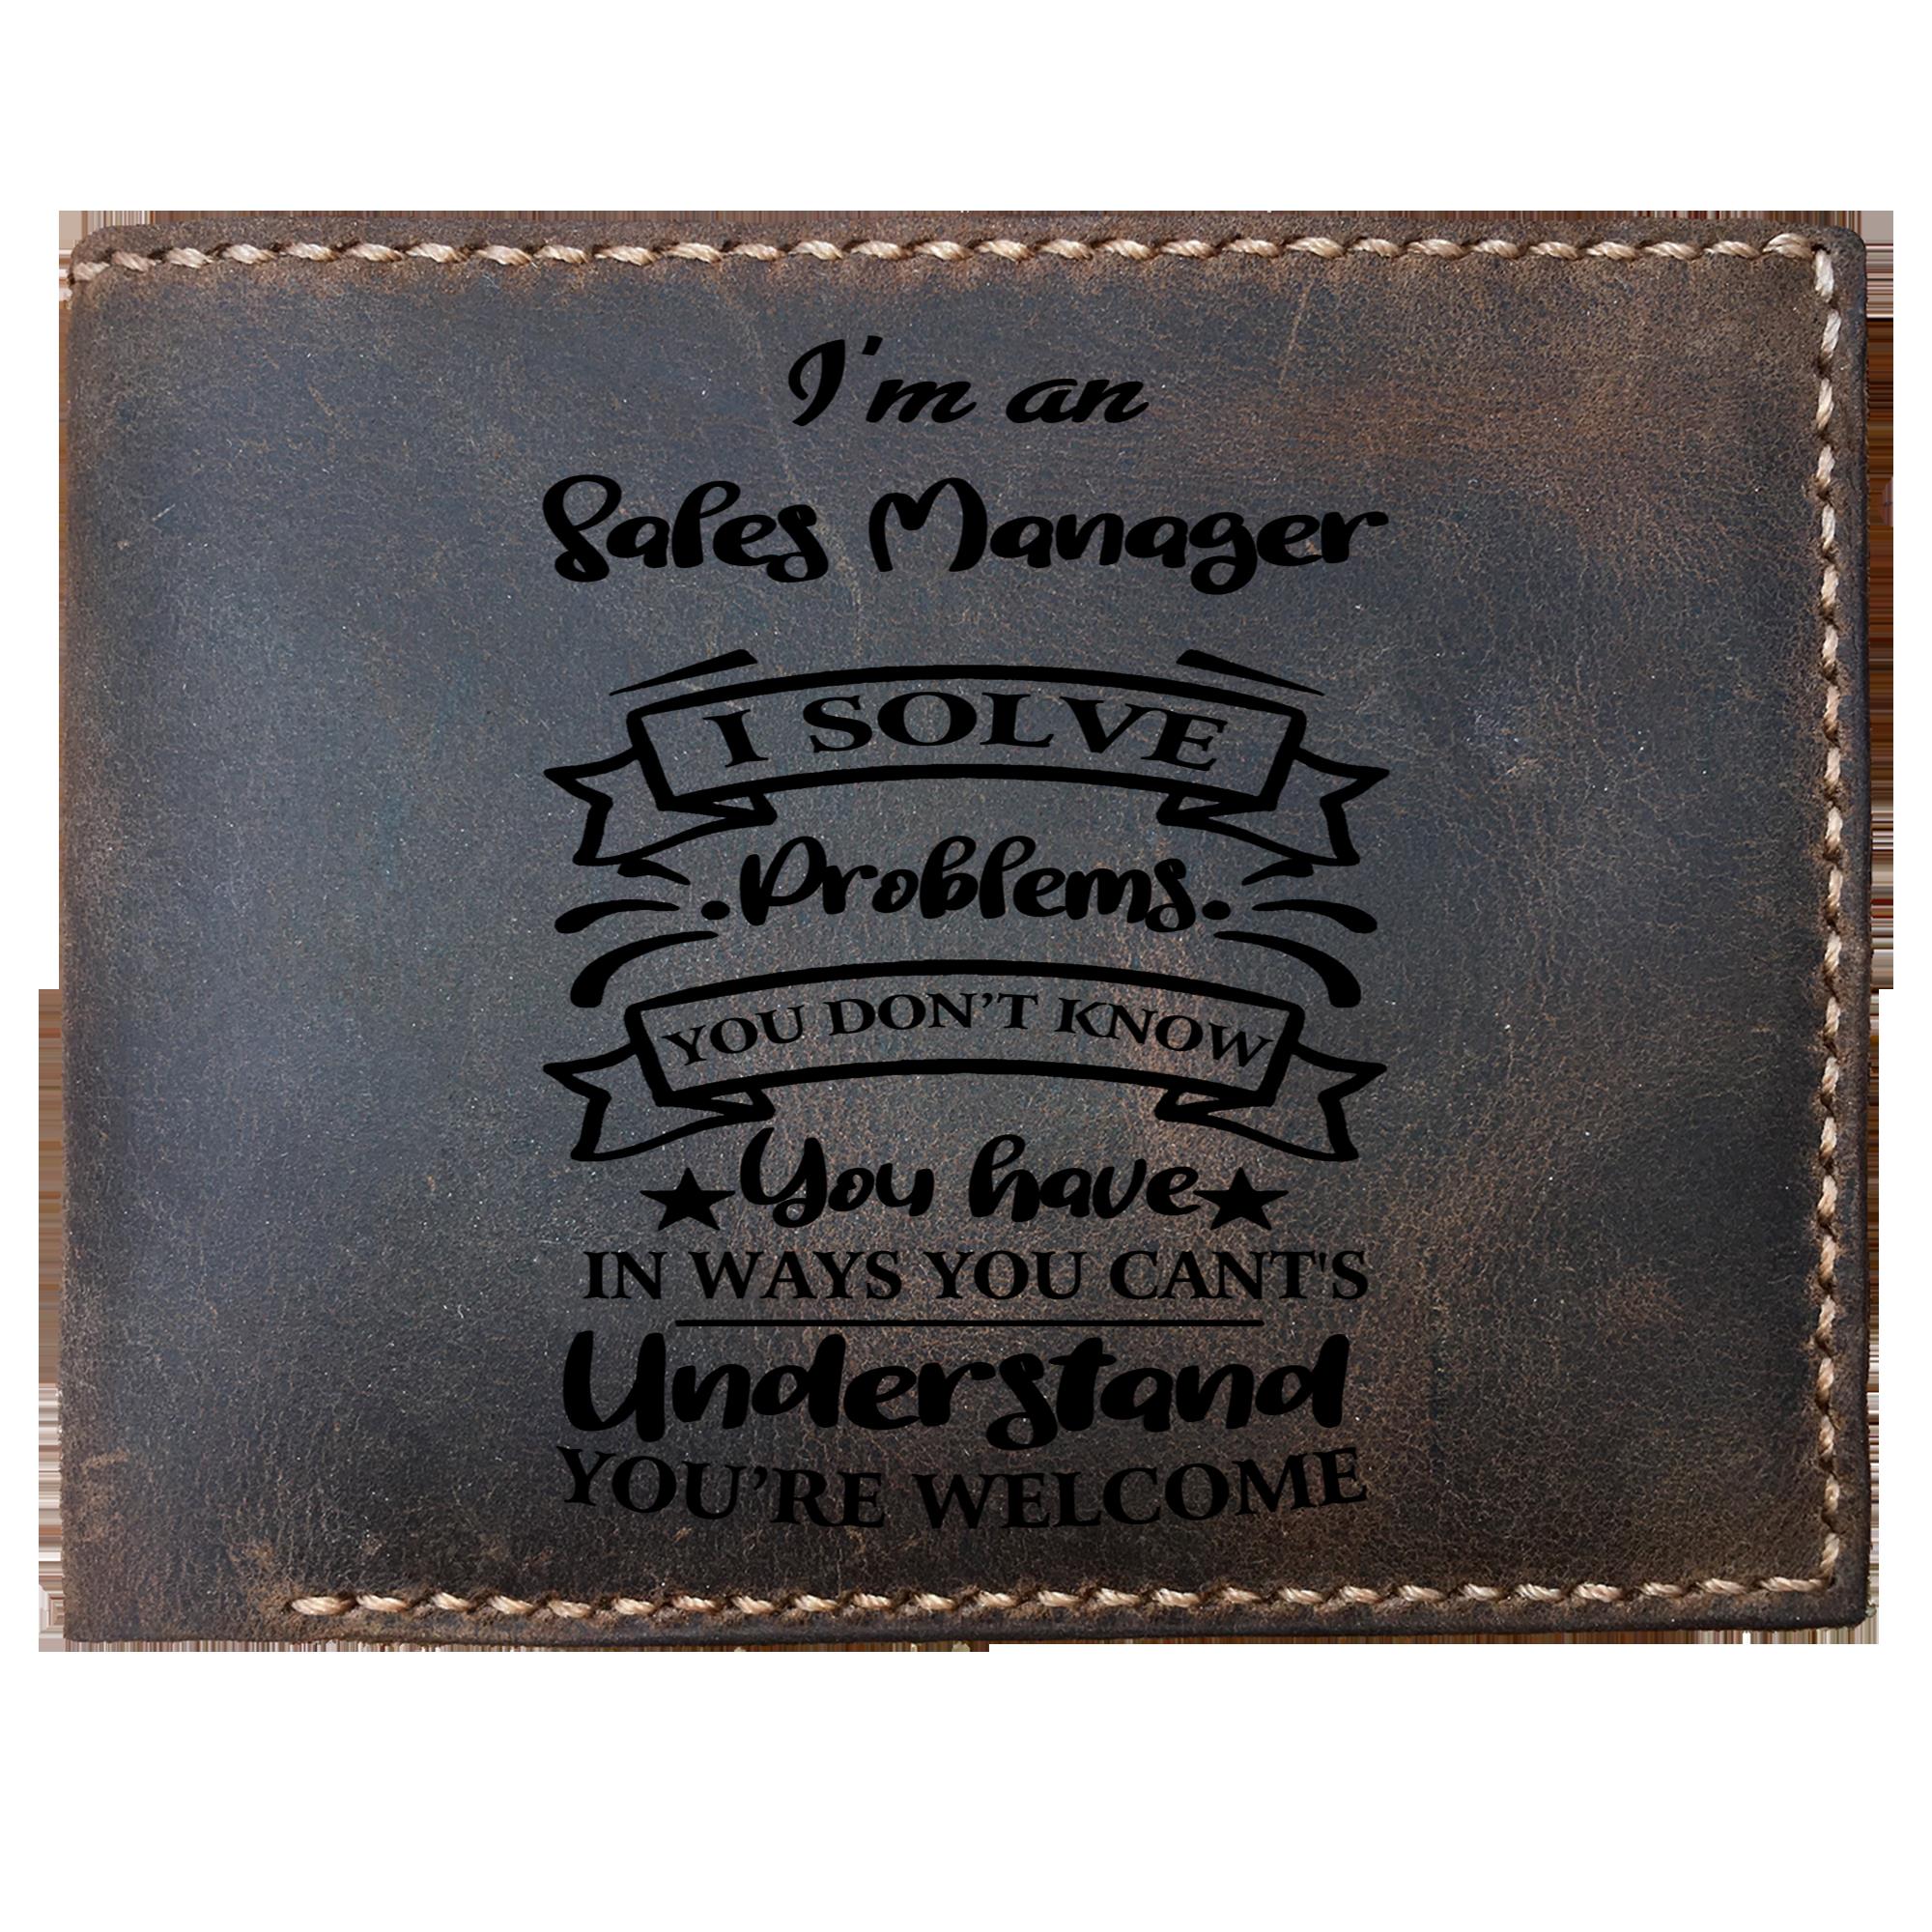 Skitongifts Funny Custom Laser Engraved Bifold Leather Wallet For Men, I'm an Sales Manager Solve Problems, Father's Day Gifts